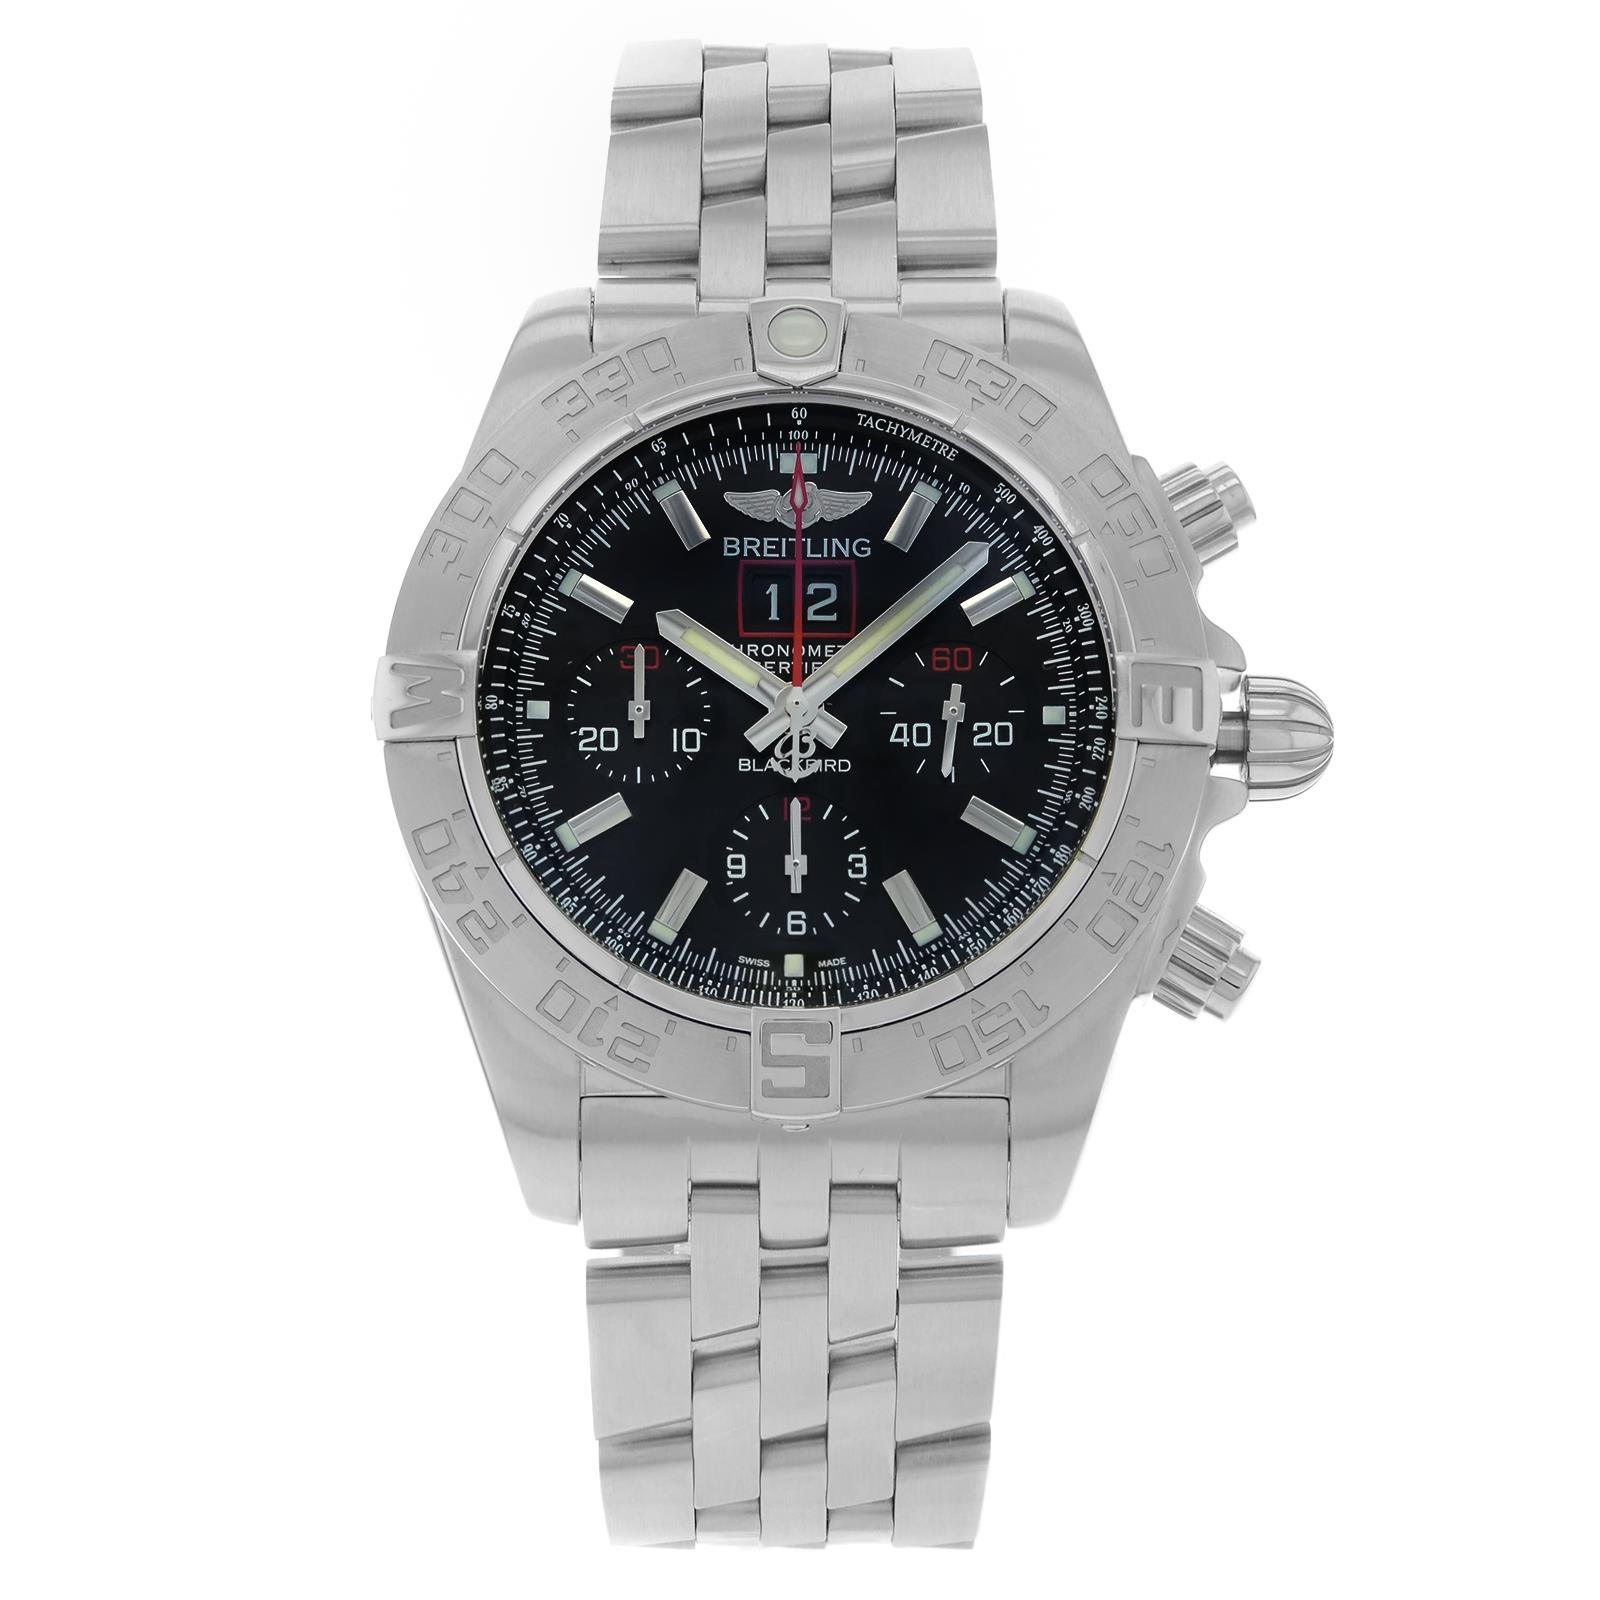 Breitling Windrider A4436010 / BB71 379A